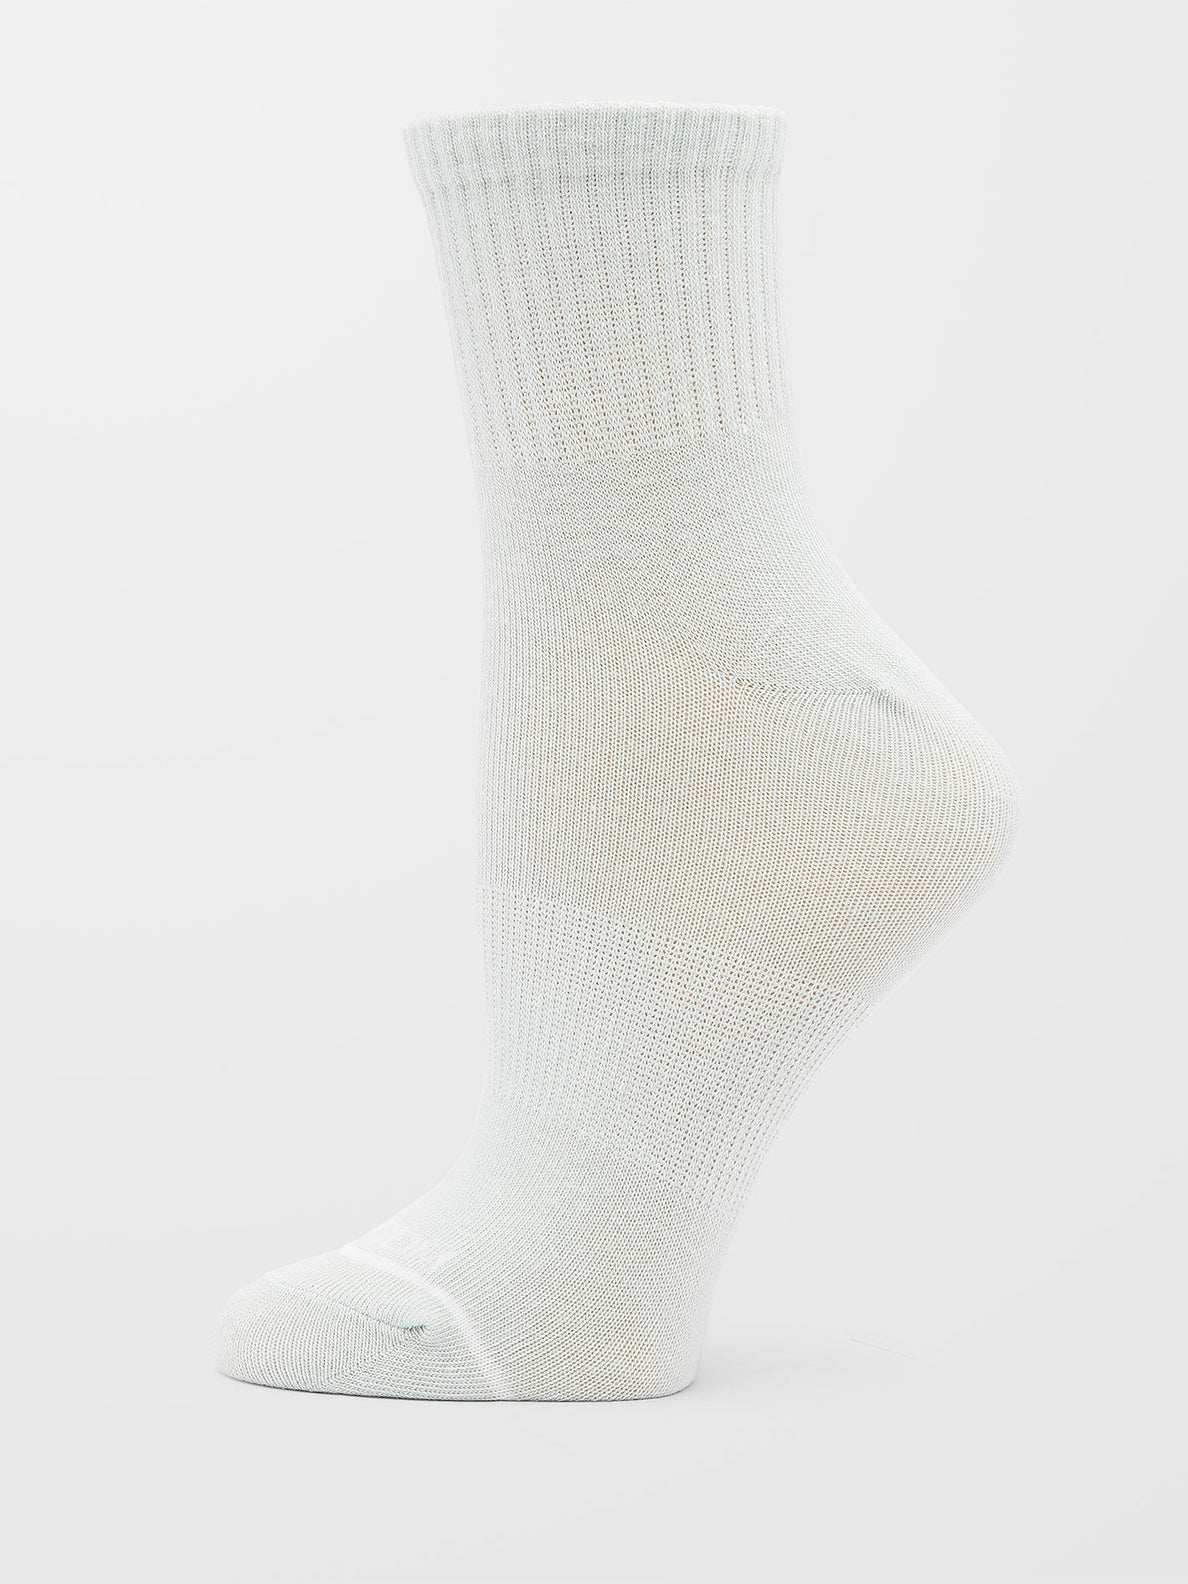 The New Crew 3 Pack Socks - Assorted Colours